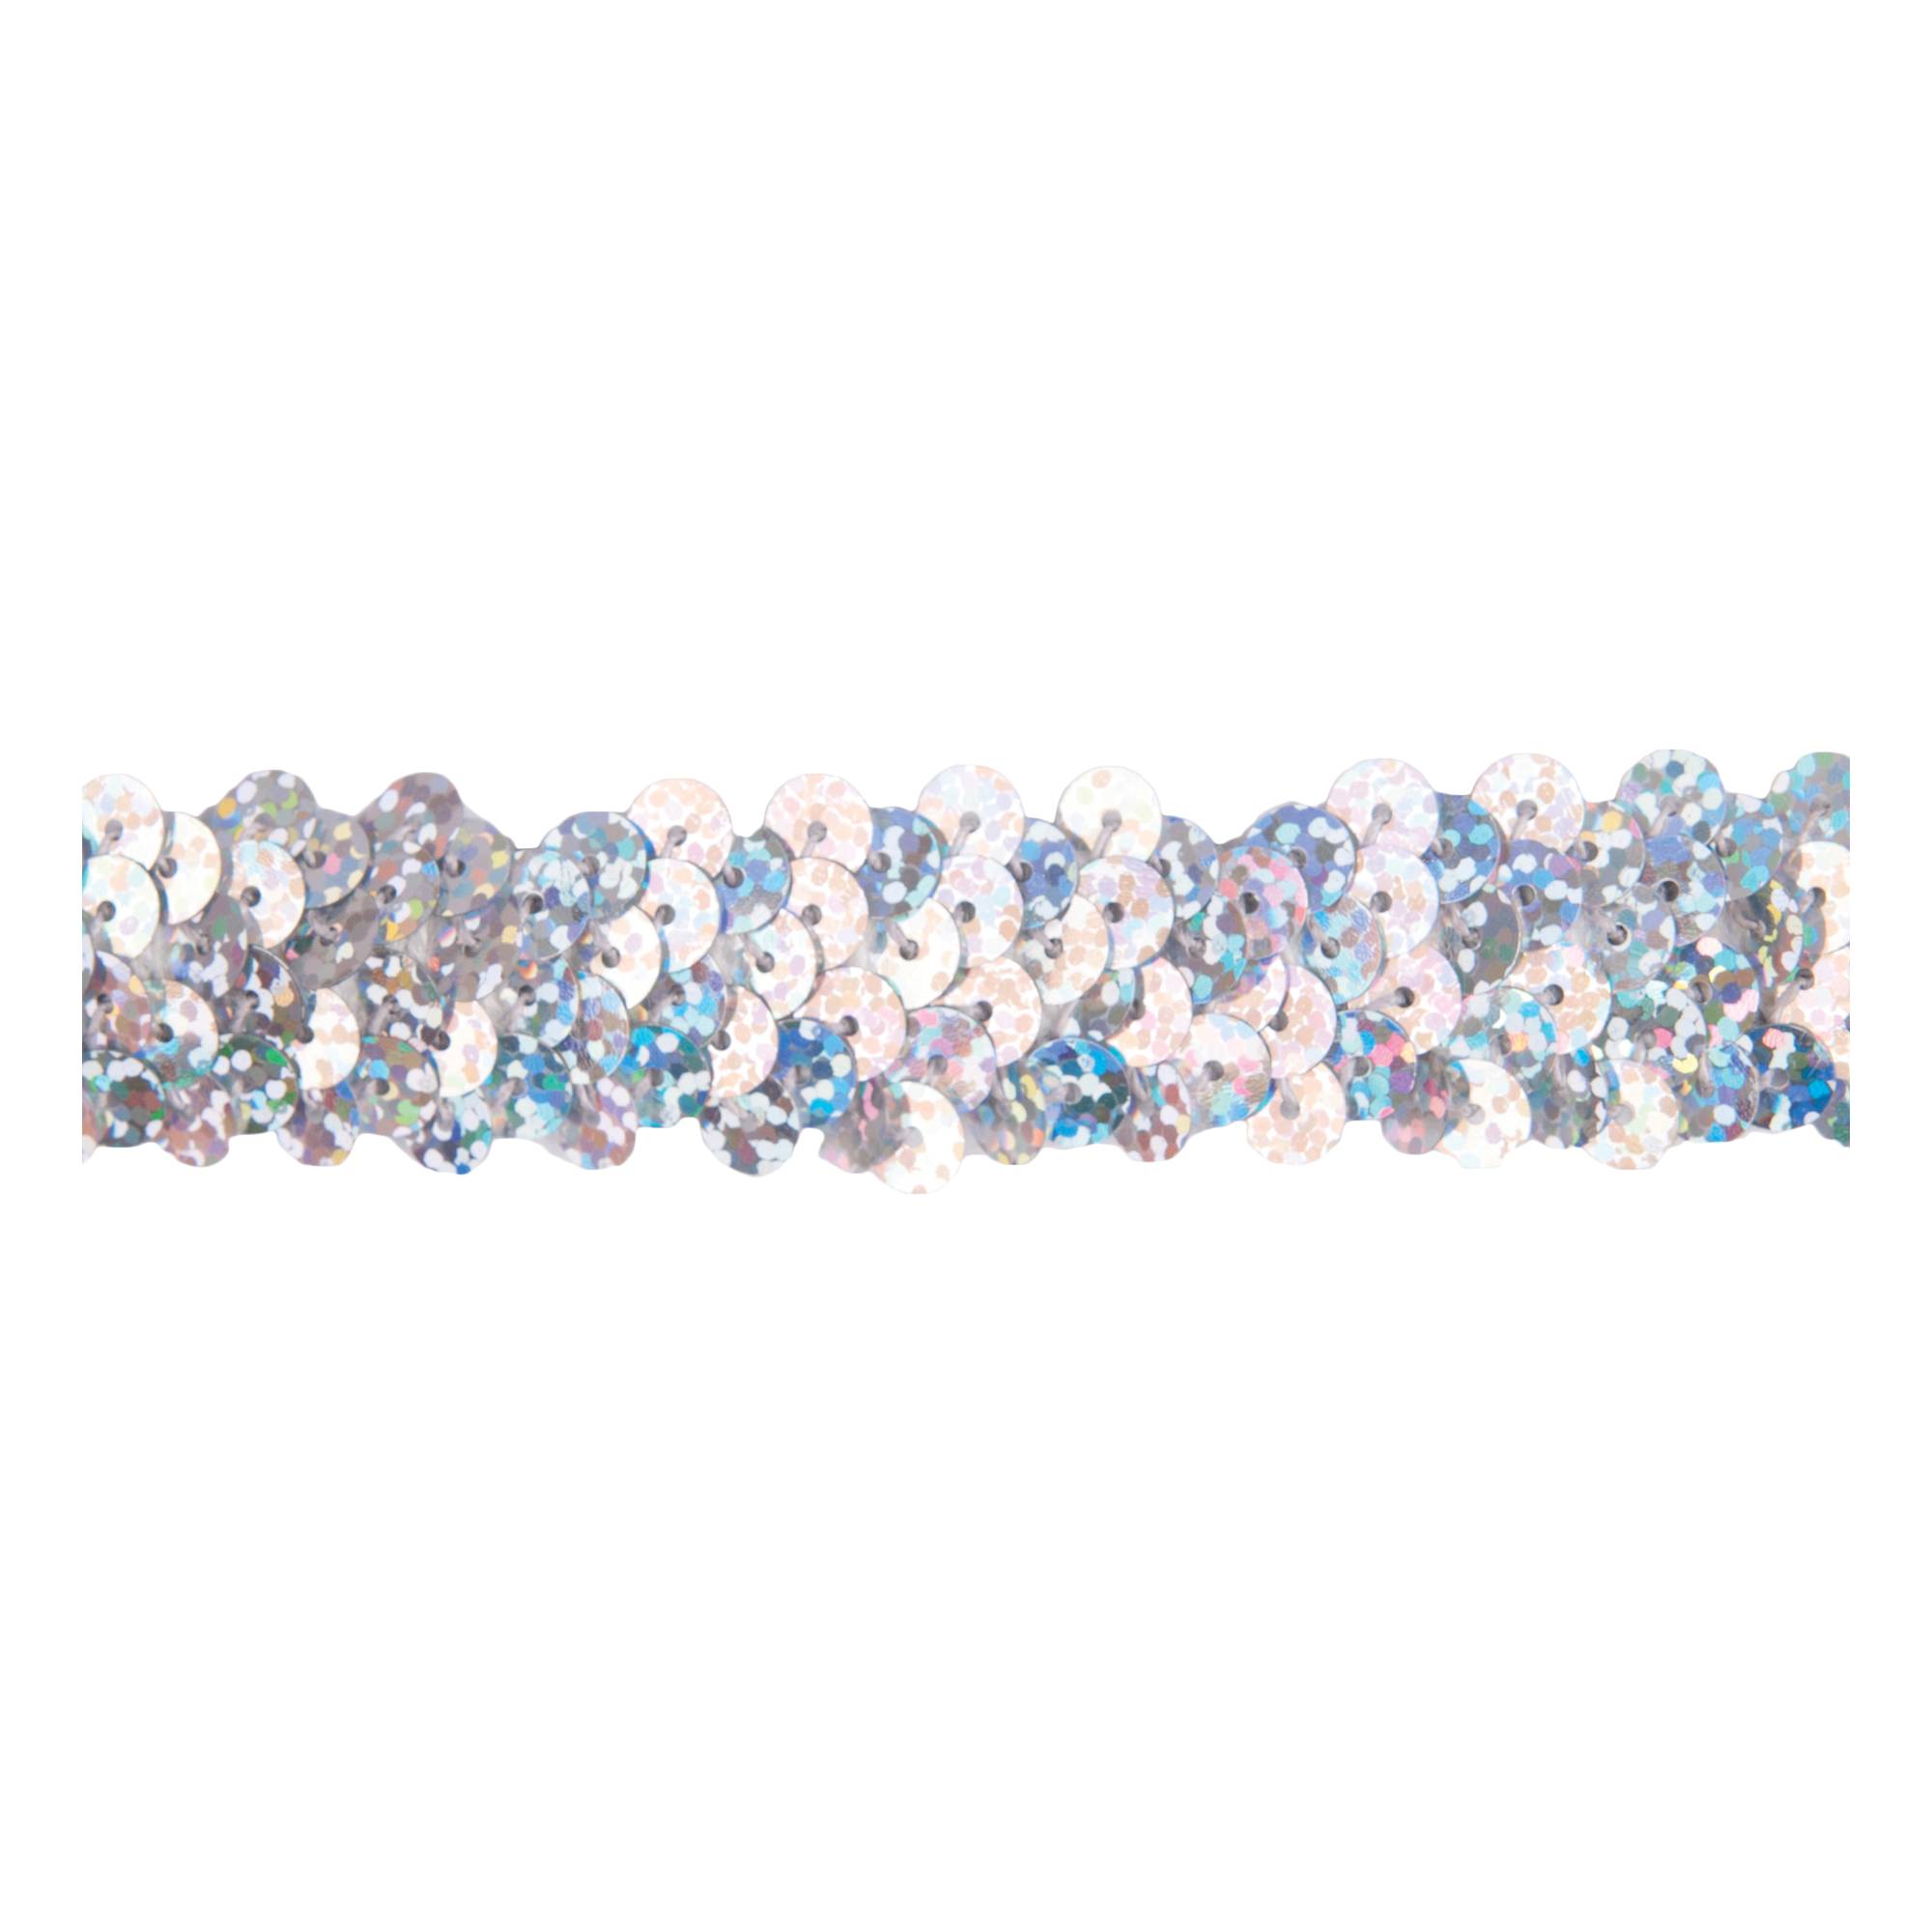 Expo Int'l 20 Yards of 1 Row 3/8 inch Starlight Hologram Stretch Sequin Trim by The Yard, Silver